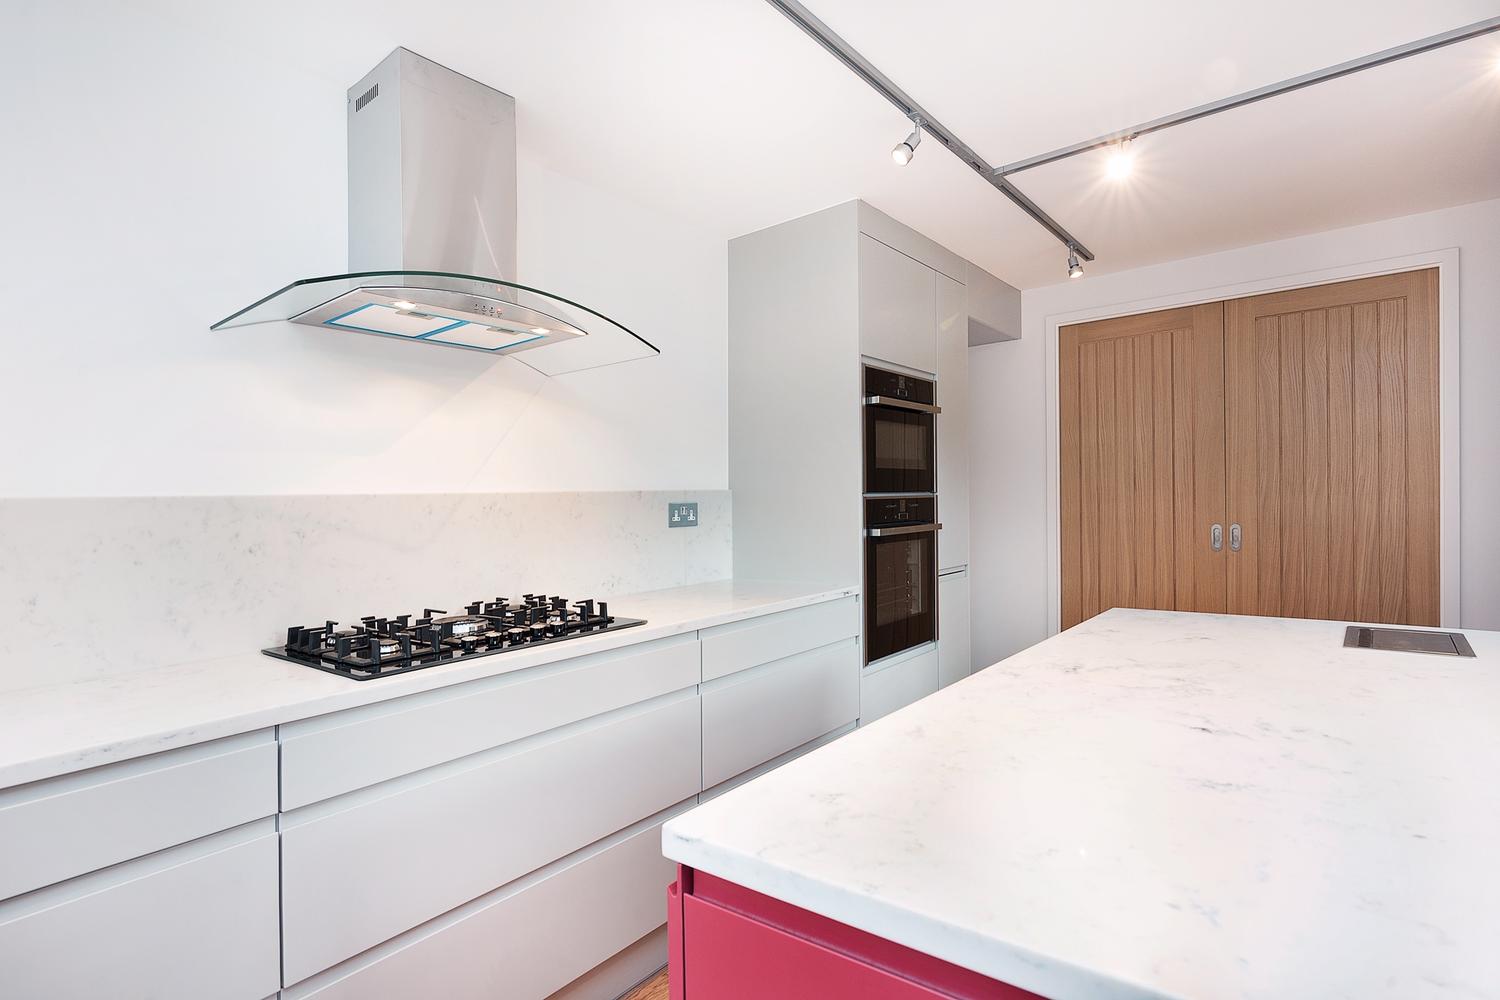 Kitchen design with an extractor hood